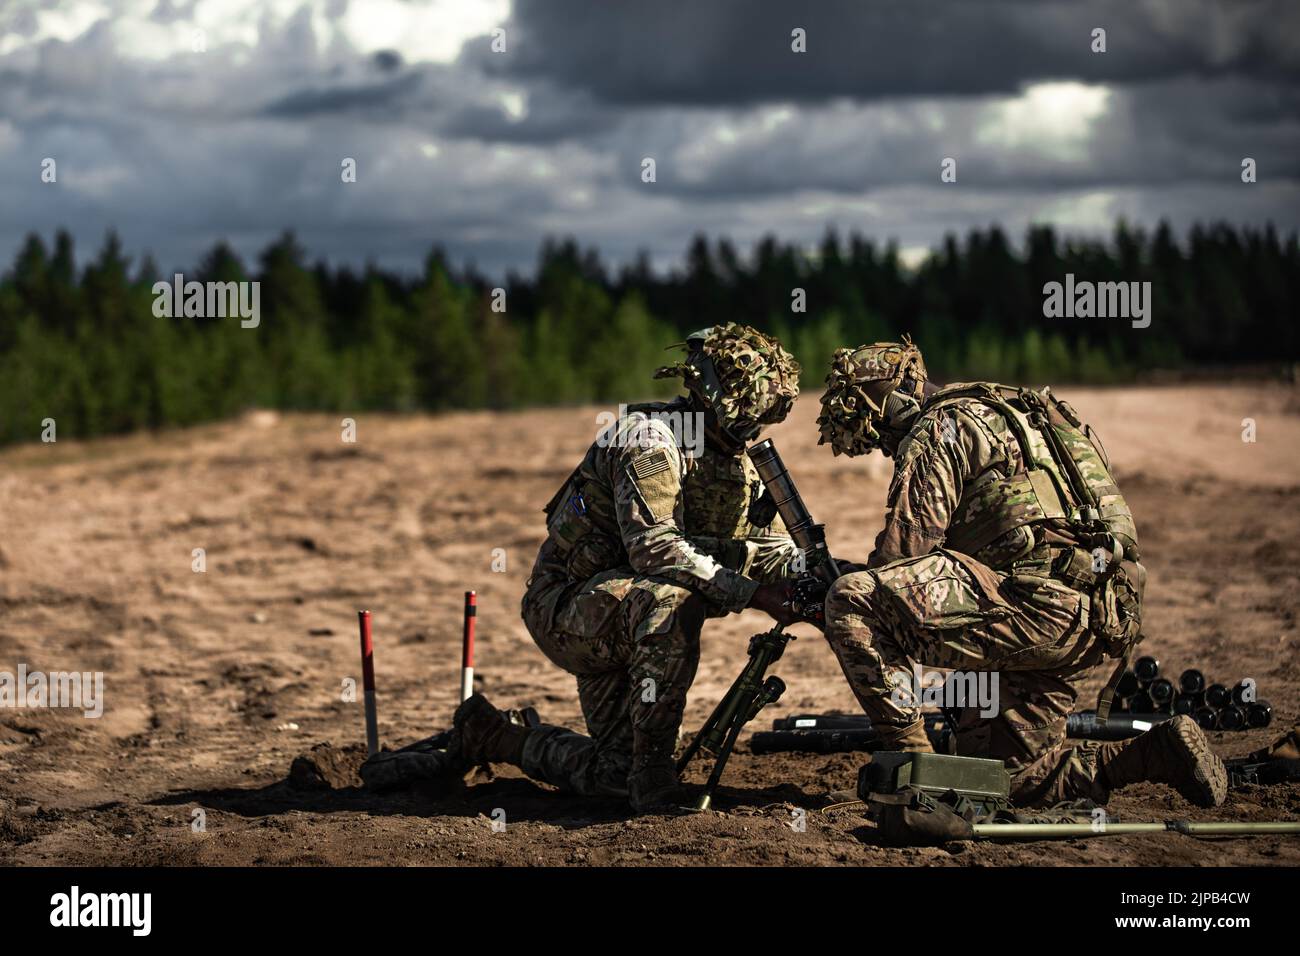 U.S. Army Spc. Joseph Smith, right, and U.S. Army Spc. Royland Reid, both indirect-fire infantrymen assigned to Viper Company, 1st Battalion, 26th Infantry Regiment, 2nd Brigade Combat Team, 101st Airborne Division (Air Assault), adjust their M224 60 mm mortar system as part of a fire mission in support of the company’s maneuver during a multinational live-fire exercise held at Rovaniemi Training Area, Finland, Aug. 11, 2022. The LFX was part of the Finnish Summer Exercise, where U.S. and Finnish troops had the opportunity to train together to amplify and strengthen the partnership and interop Stock Photo